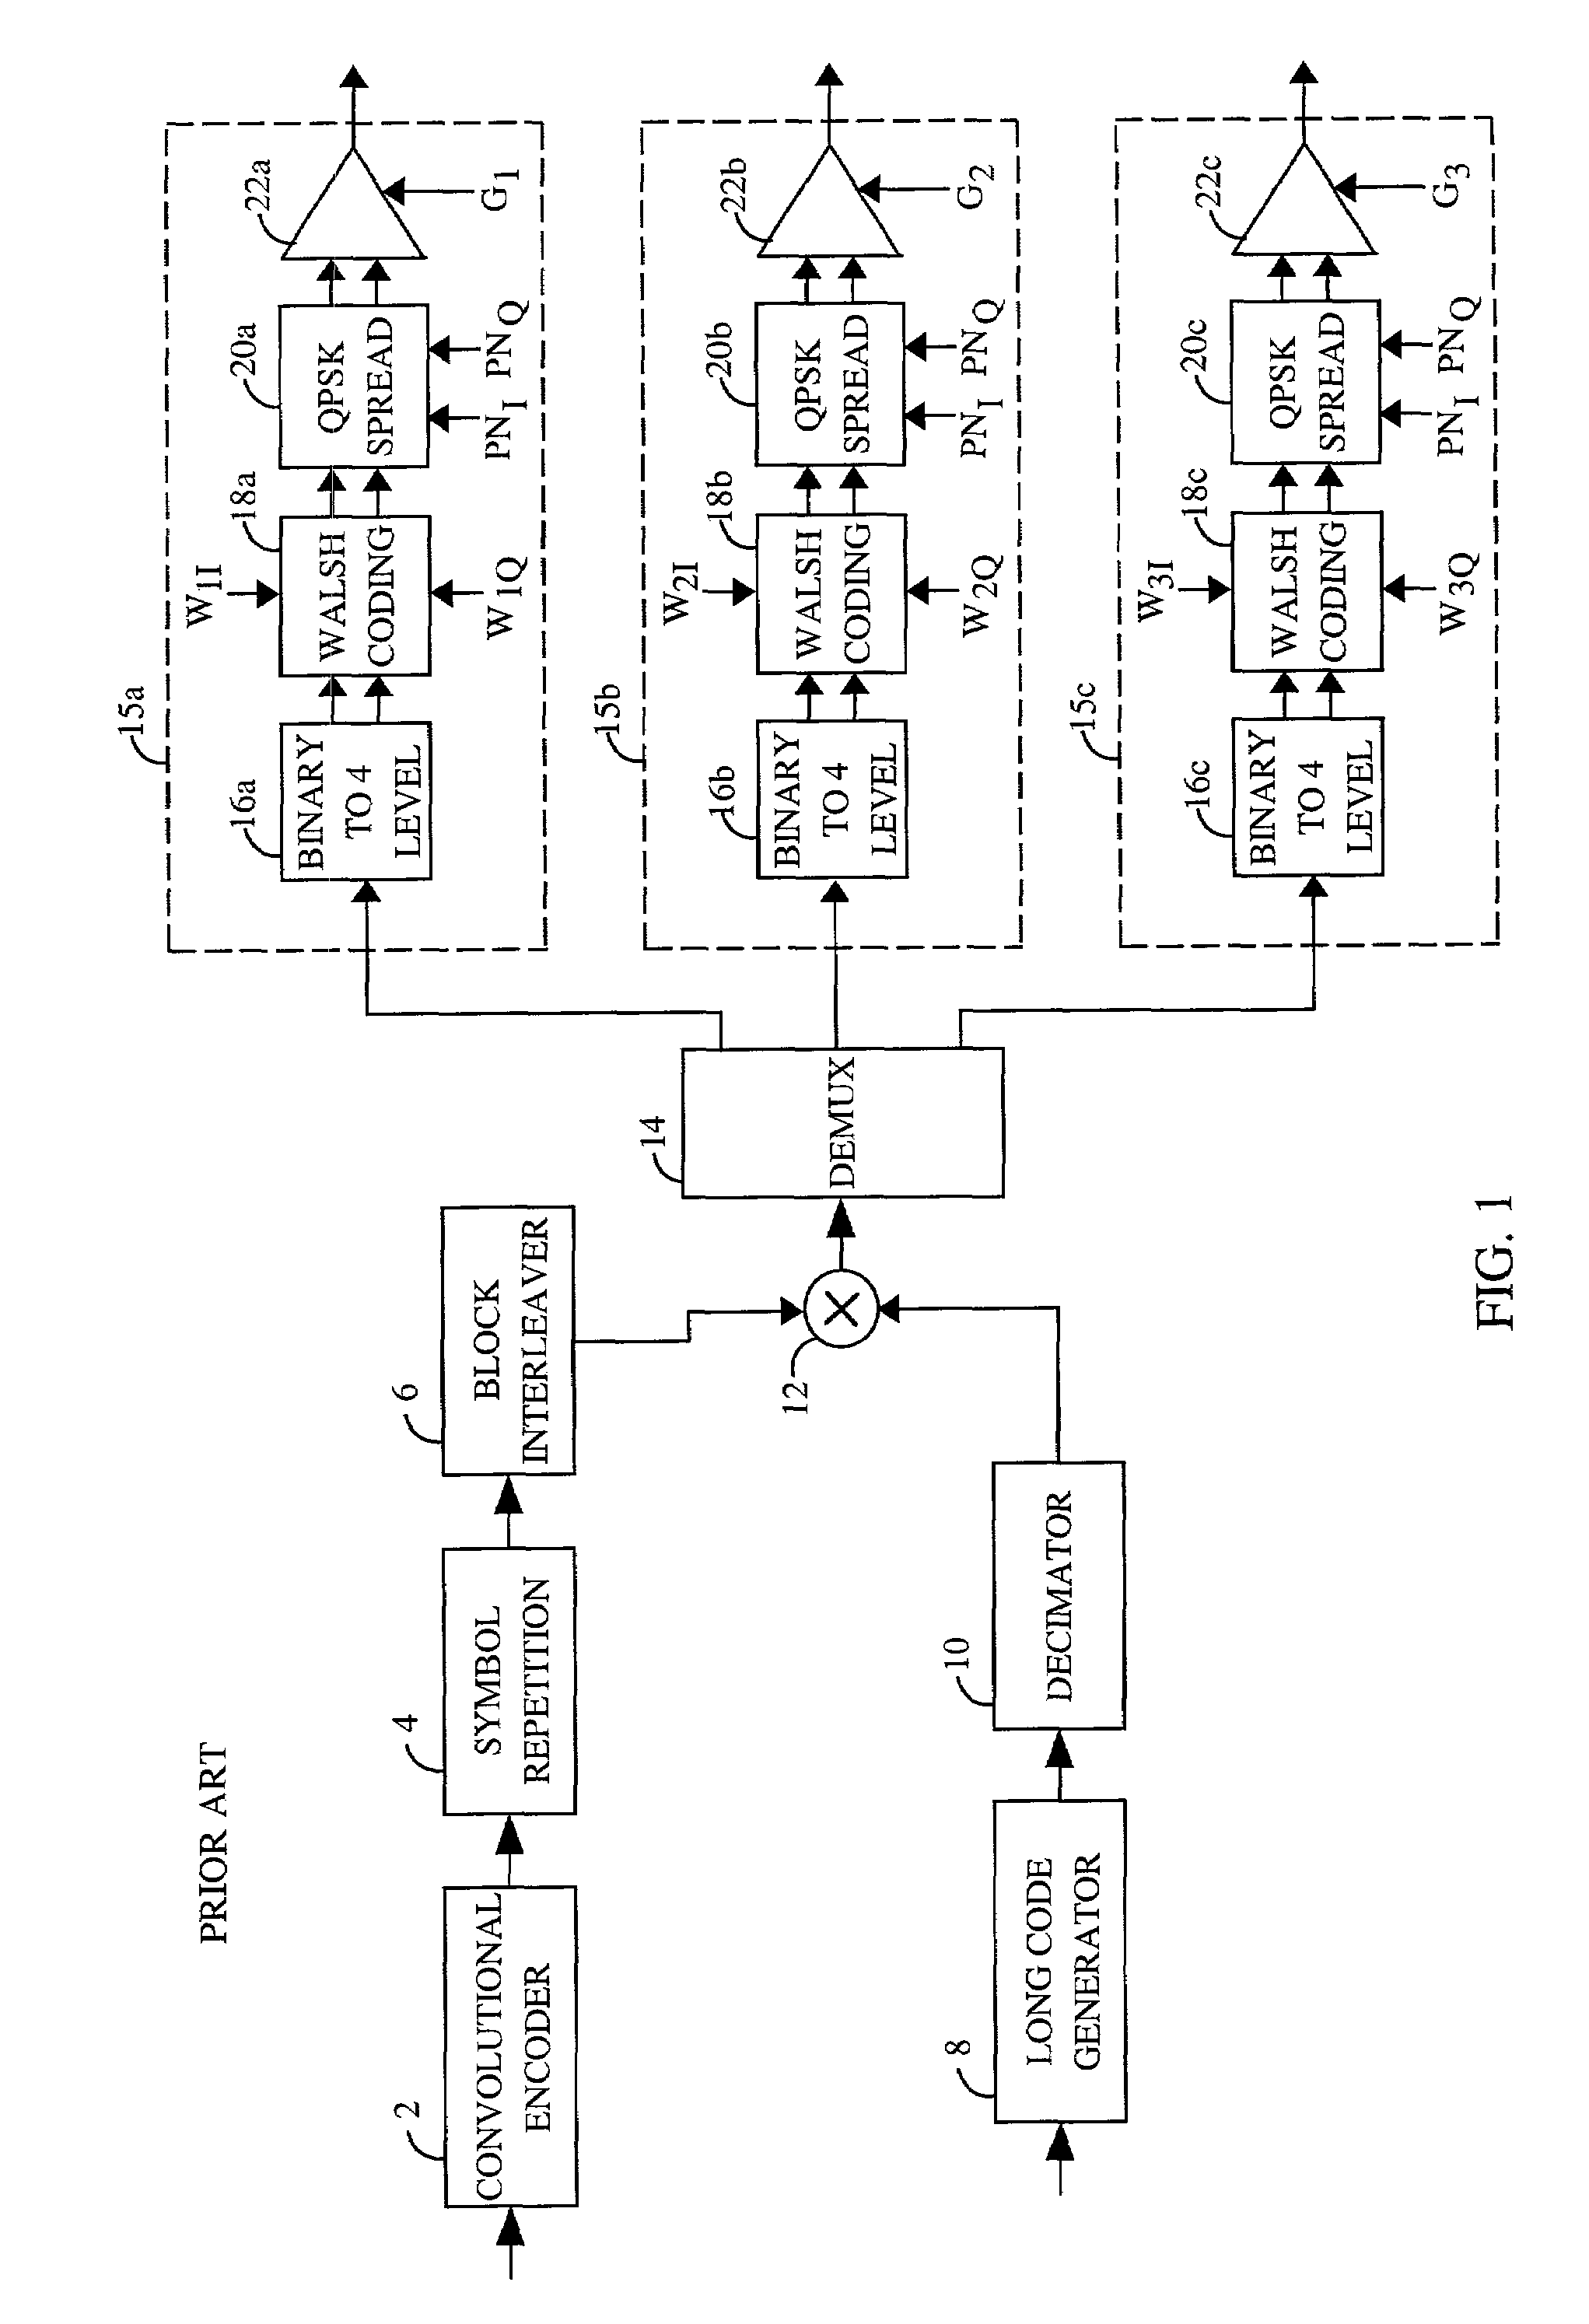 Method and apparatus for transmitting and receiving high speed data in a CDMA communication system using multiple carriers